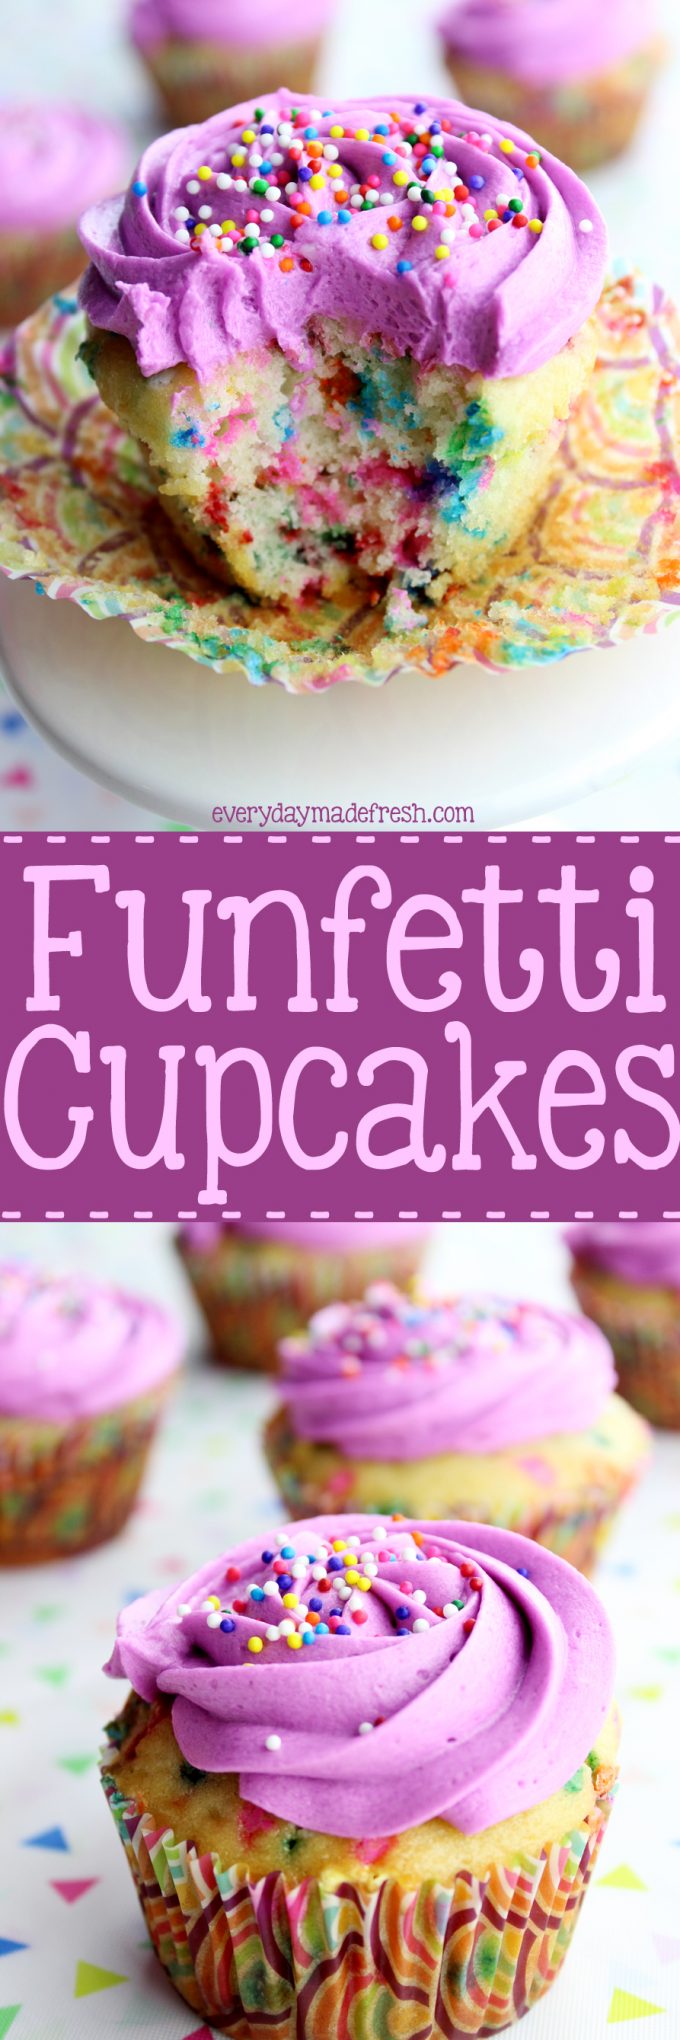 Sprinkles are all the rage, which means these Funfetti Cupcakes will be a hit at your next party! They are simple to make and the best part...they don't require a mixer! | EverydayMadeFresh.com